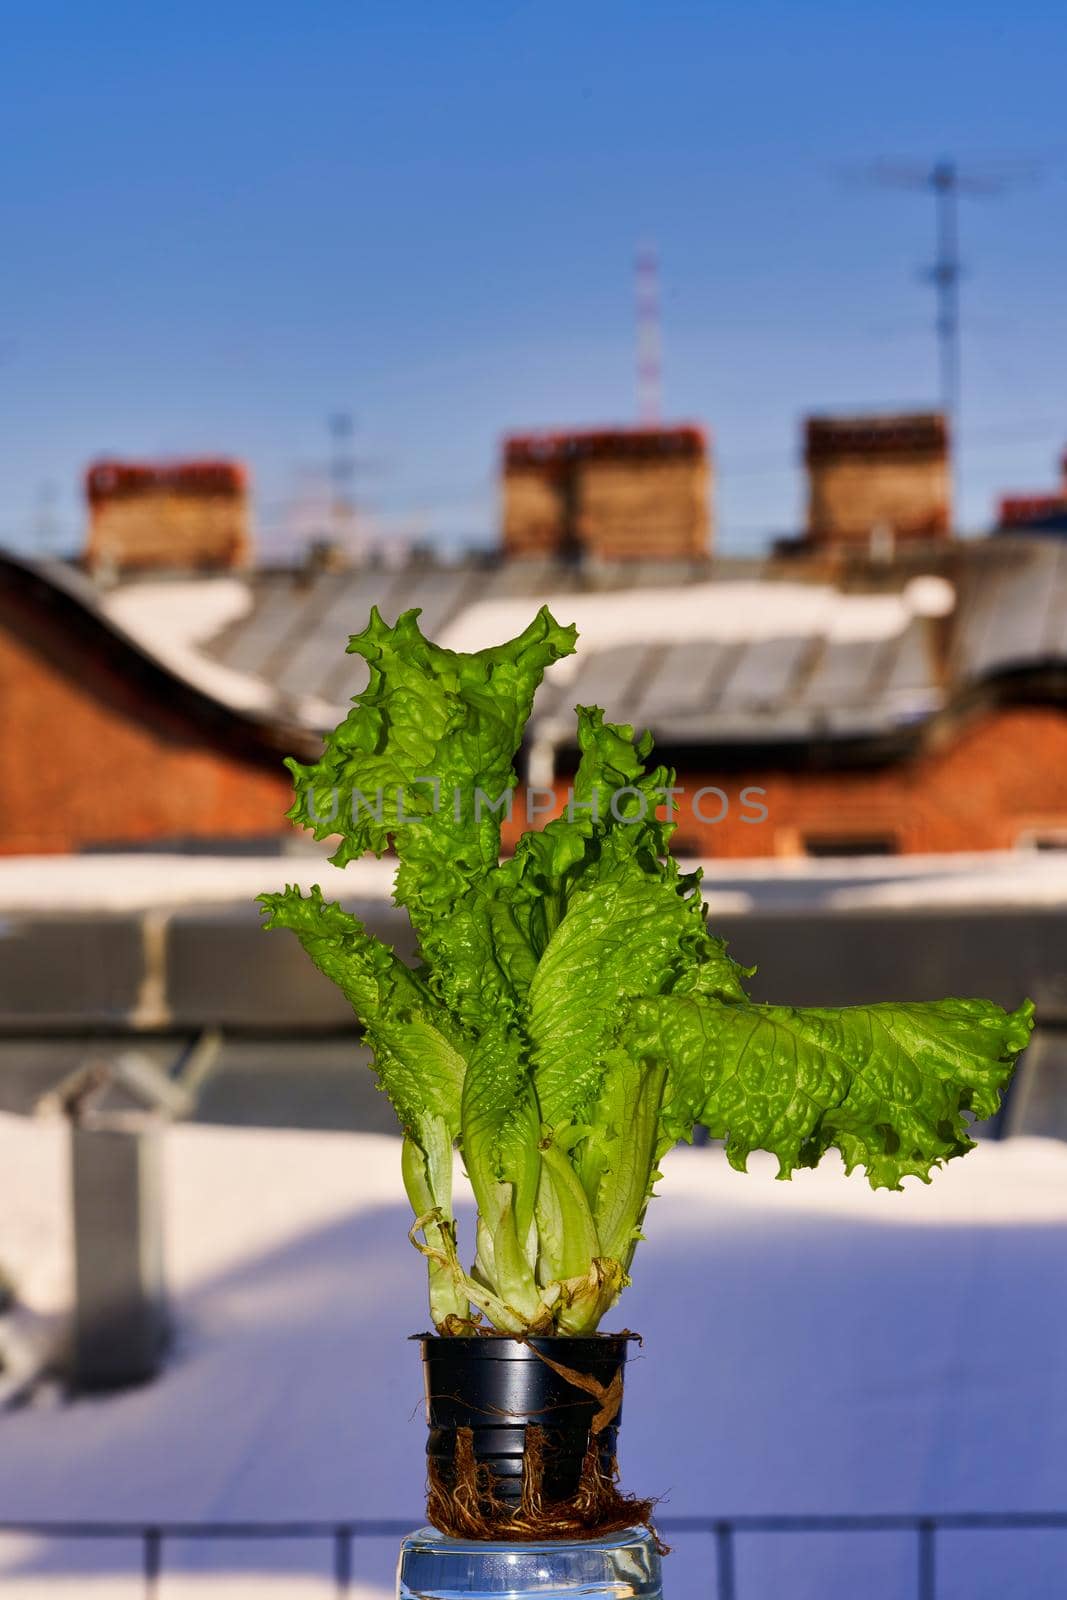 Green lettuce is grown in the winter at home on the windowsill. Home agriculture